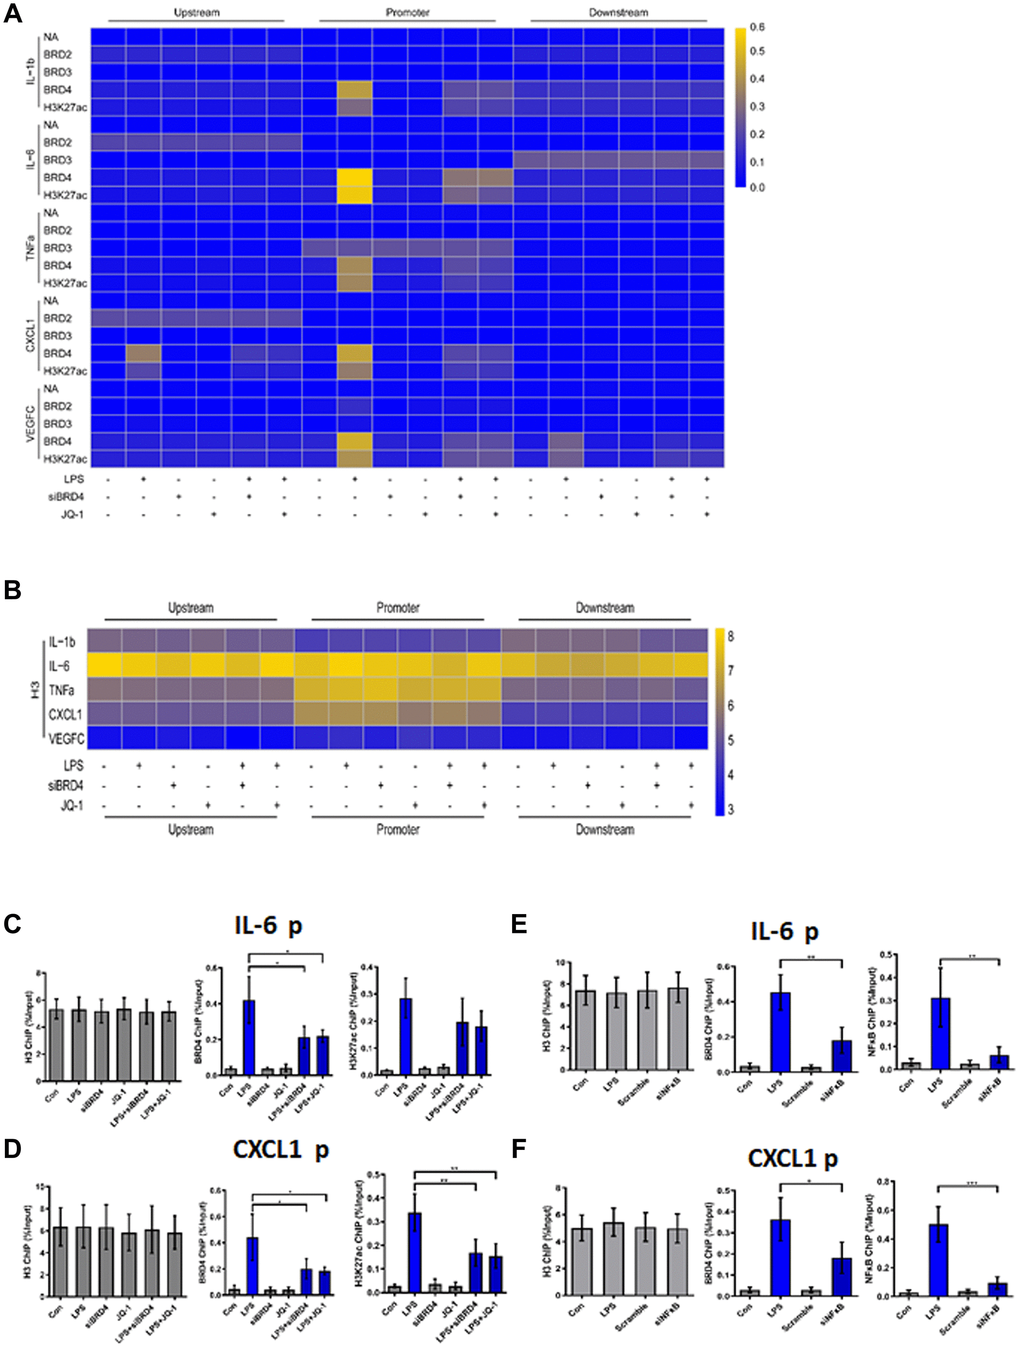 BRD4 is essential for maintaining the chromatin environment for LPS-induced macrophage senescence. (A) To demonstrate the binding of the indicated proteins to the target genes in THP-1 macrophages, a heatmap was generated using the ChIP-qPCR values. ChIP-qPCR enrichments of no-antibody control (NA) BRD2, BRD3, BRD4, H3K27ac, and H3 using primers spanning –1 kb to +1 kb of the indicated SASP genes were arrayed from blue (no enrichment) to yellow (maximal enrichment). (B) The control H3 protein co-precipitated evenly with the ChIP targets. A heatmap was generated using the ChIP-qPCR values for histone H3 between –1 kb and +1 kb of the indicated genes. No significant changes were observed in H3 enrichment for the listed genes in each treatment group. P-values were determined using one-way ANOVA. (C, D) The representative ChIP-qPCR values for the IL-6 and CXCL1 genes selected from the experiments. (E, F) Representative ChIP-qPCR values for the IL-6 and CXCL1 genes selected from experiments with different treatments. The horizontal dotted line indicates the upper limit of the 95% confidence interval of the signal from no-antibody (NA) ChIP. Values are presented as the mean ± SEM of three independent experiments. *p 